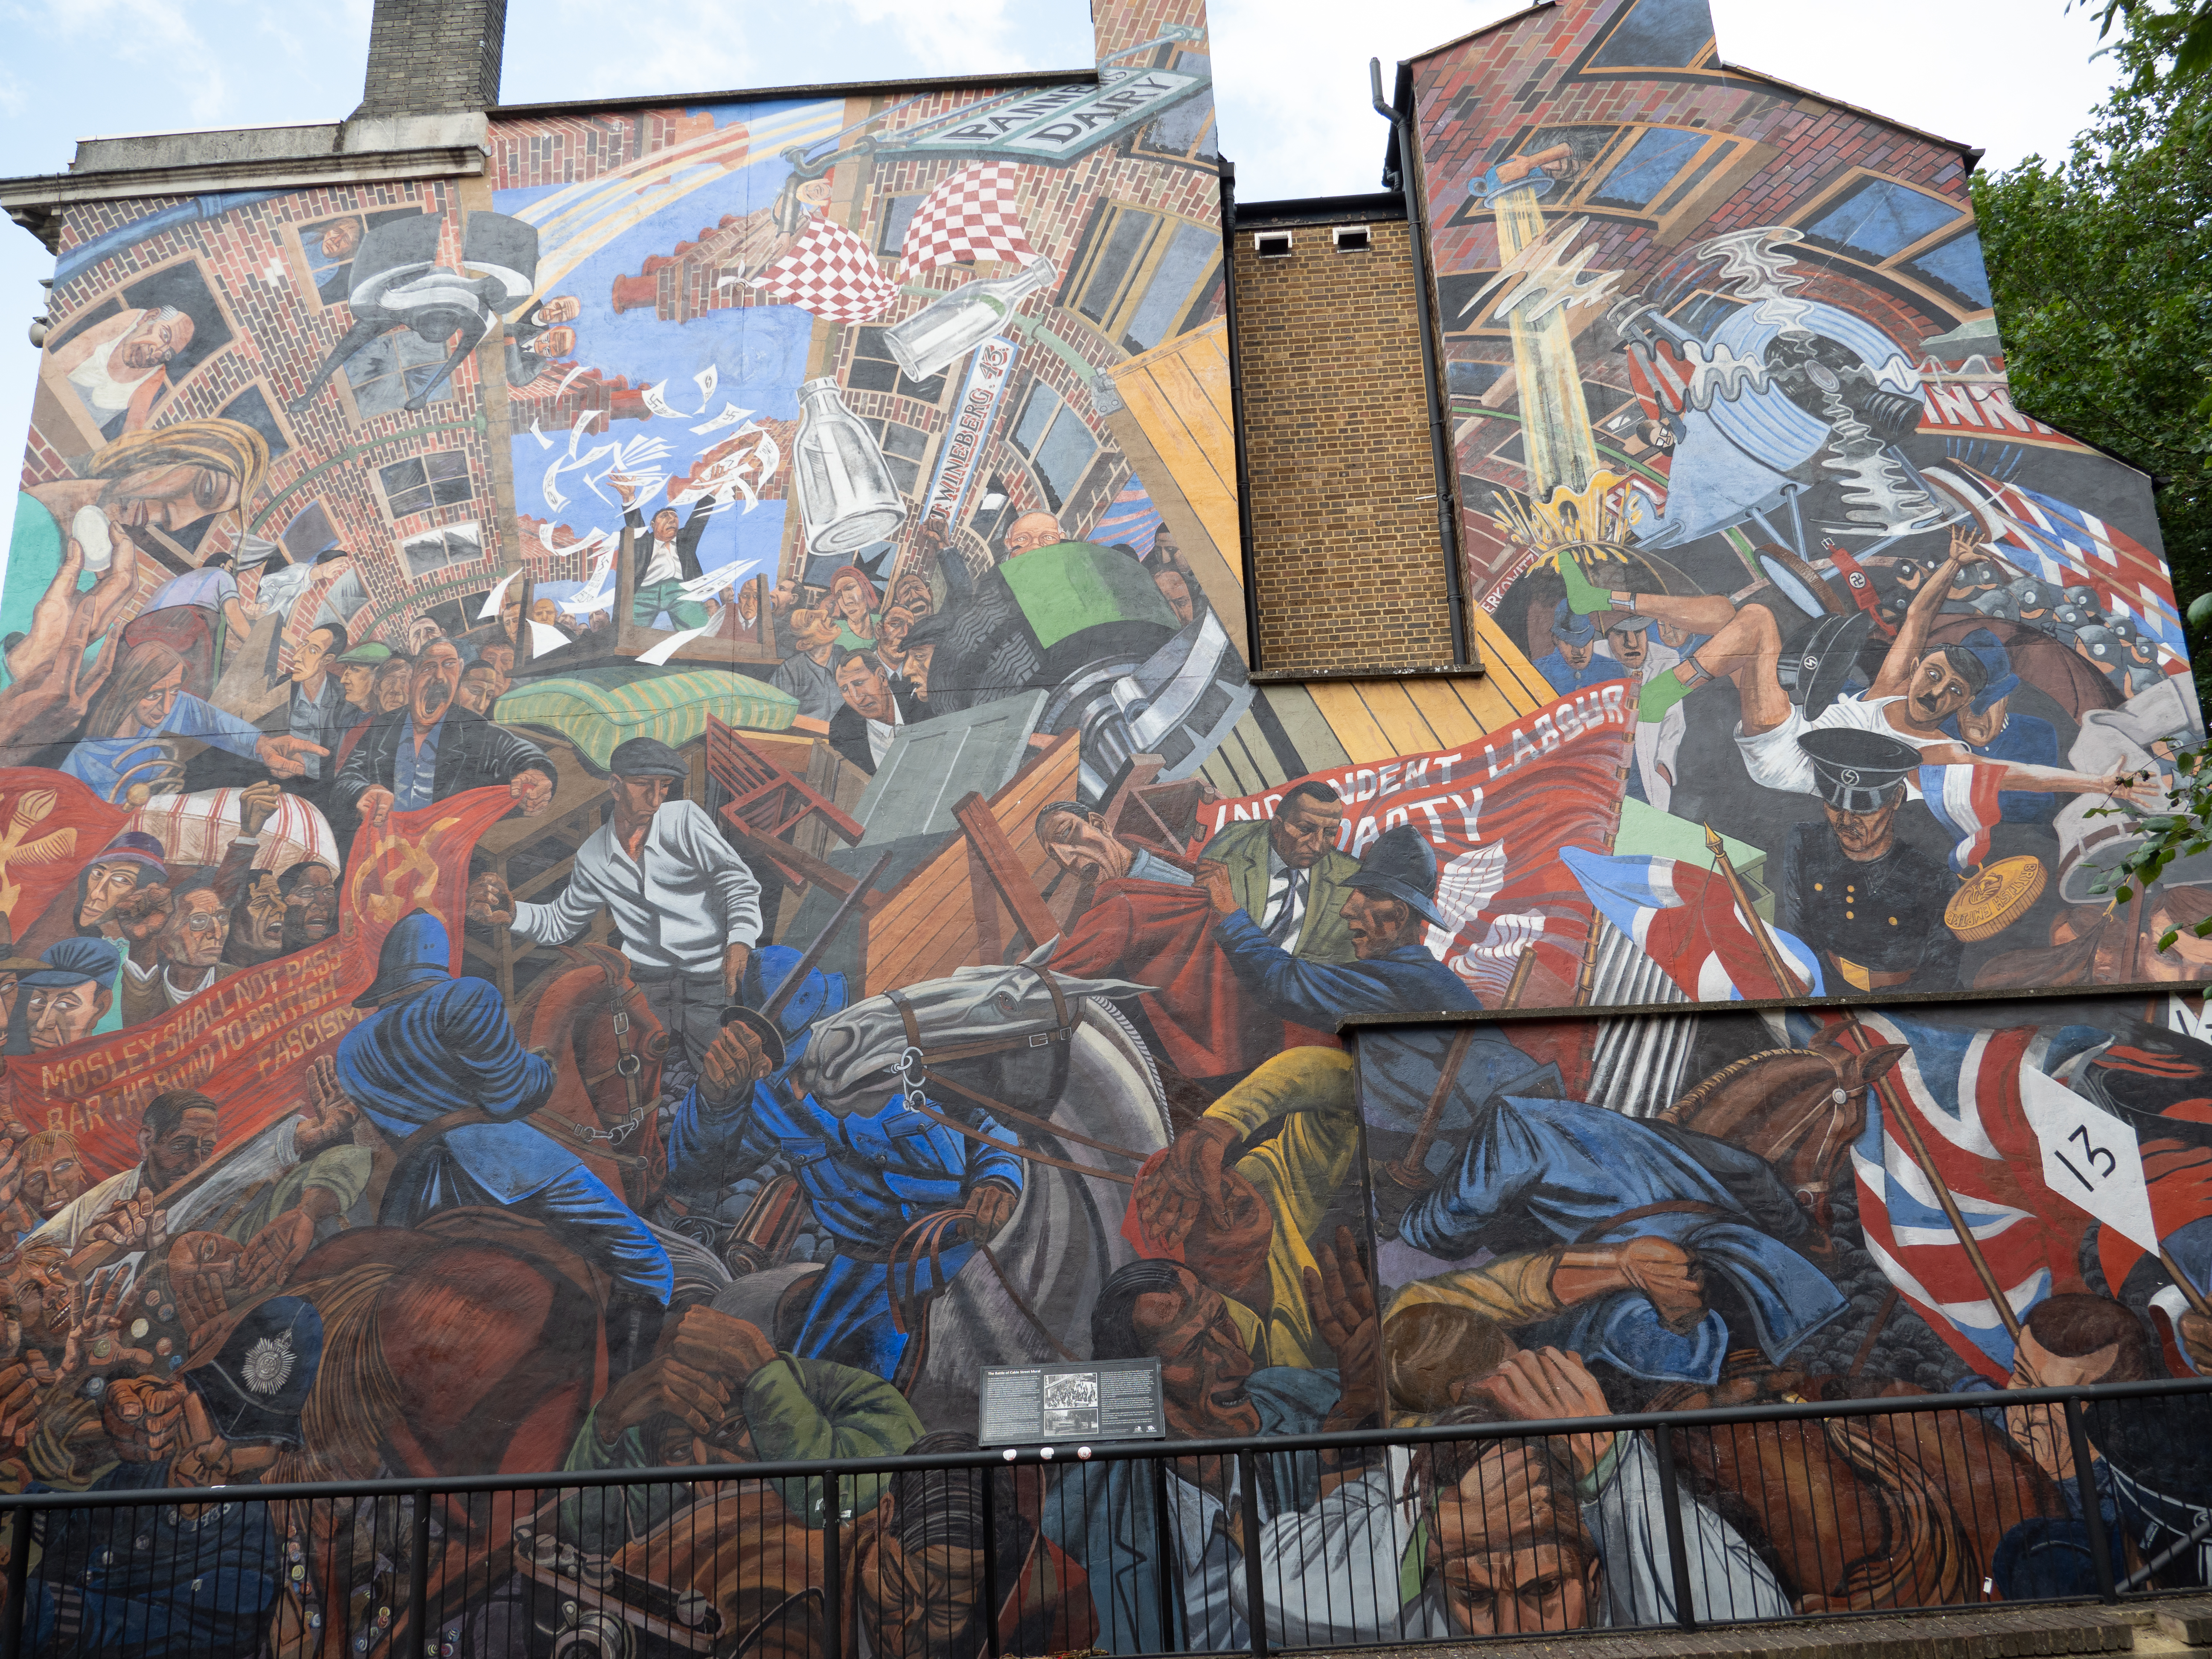 A photograph of the mural described in the paragraph above.